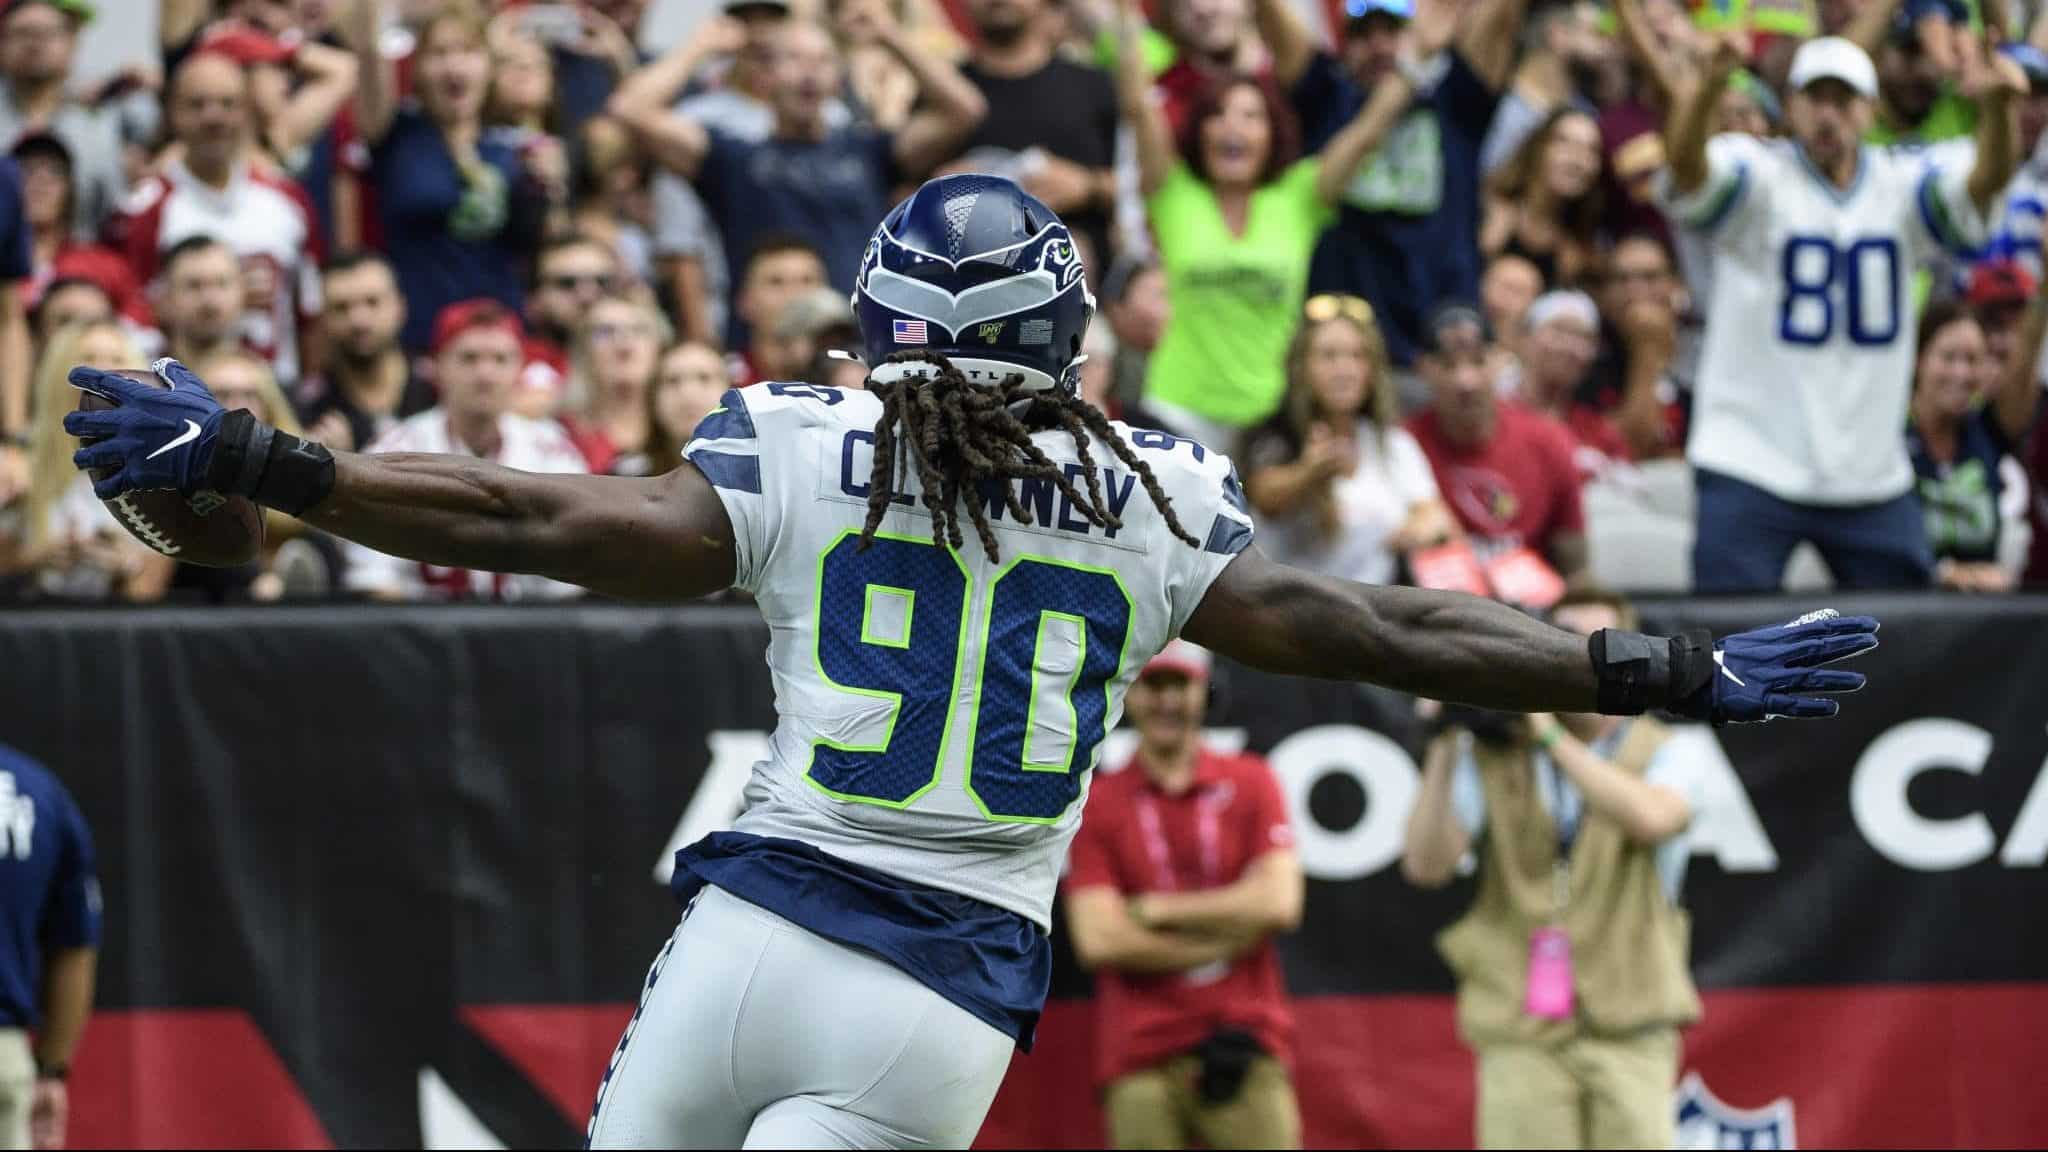 GLENDALE, ARIZONA - SEPTEMBER 29: Outside linebacker Jadeveon Clowney #90 of the Seattle Seahawks runs in an interception for a touchdown in the first half of the NFL game against the Arizona Cardinals at State Farm Stadium on September 29, 2019 in Glendale, Arizona.